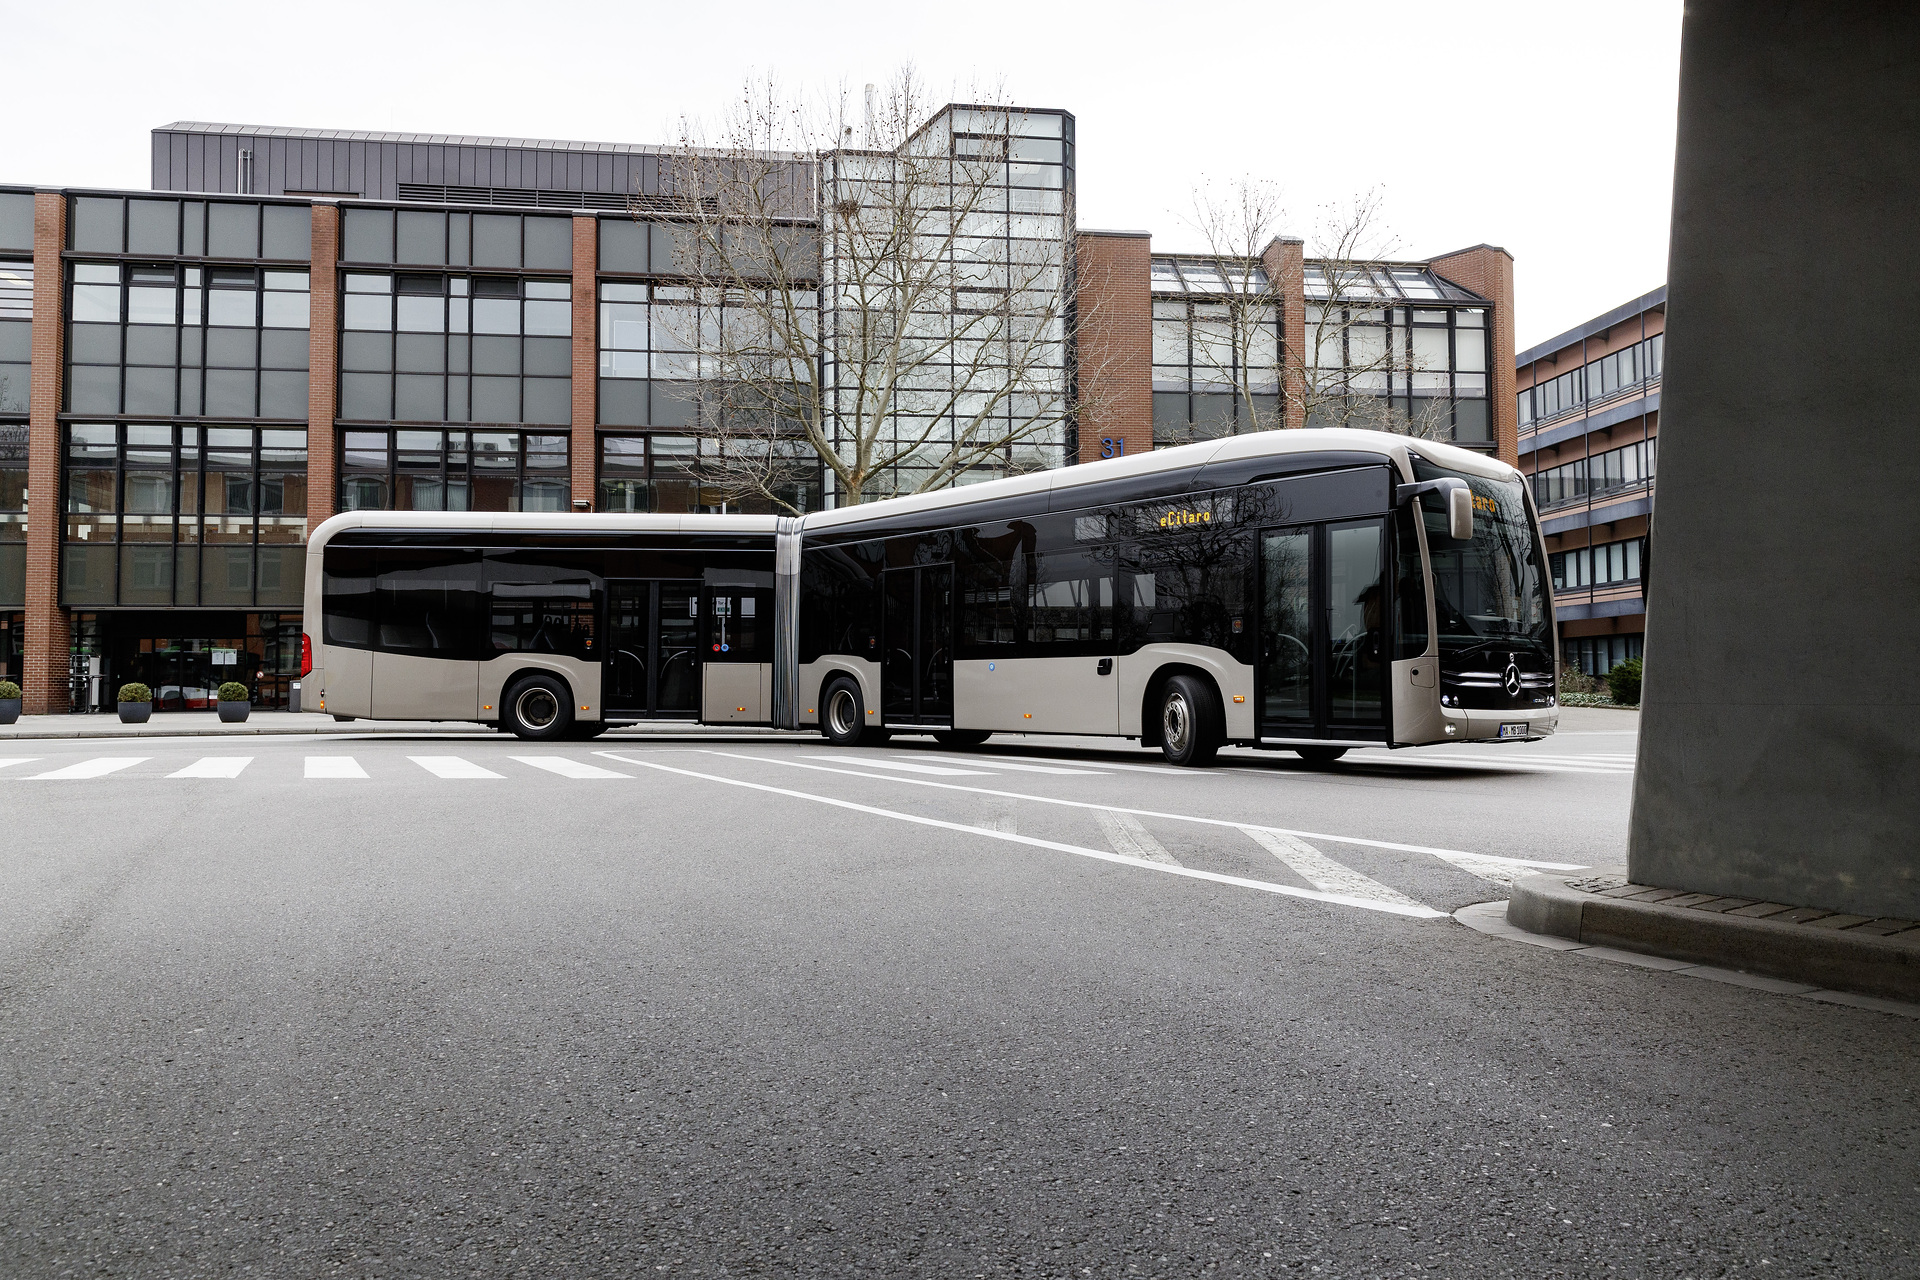 Wroclaw on the road to electromobility: Public transportation company MPK Wroclaw is taking its initial steps toward emission-free bus transport and has ordered 11 Mercedes-Benz eCitaro G buses